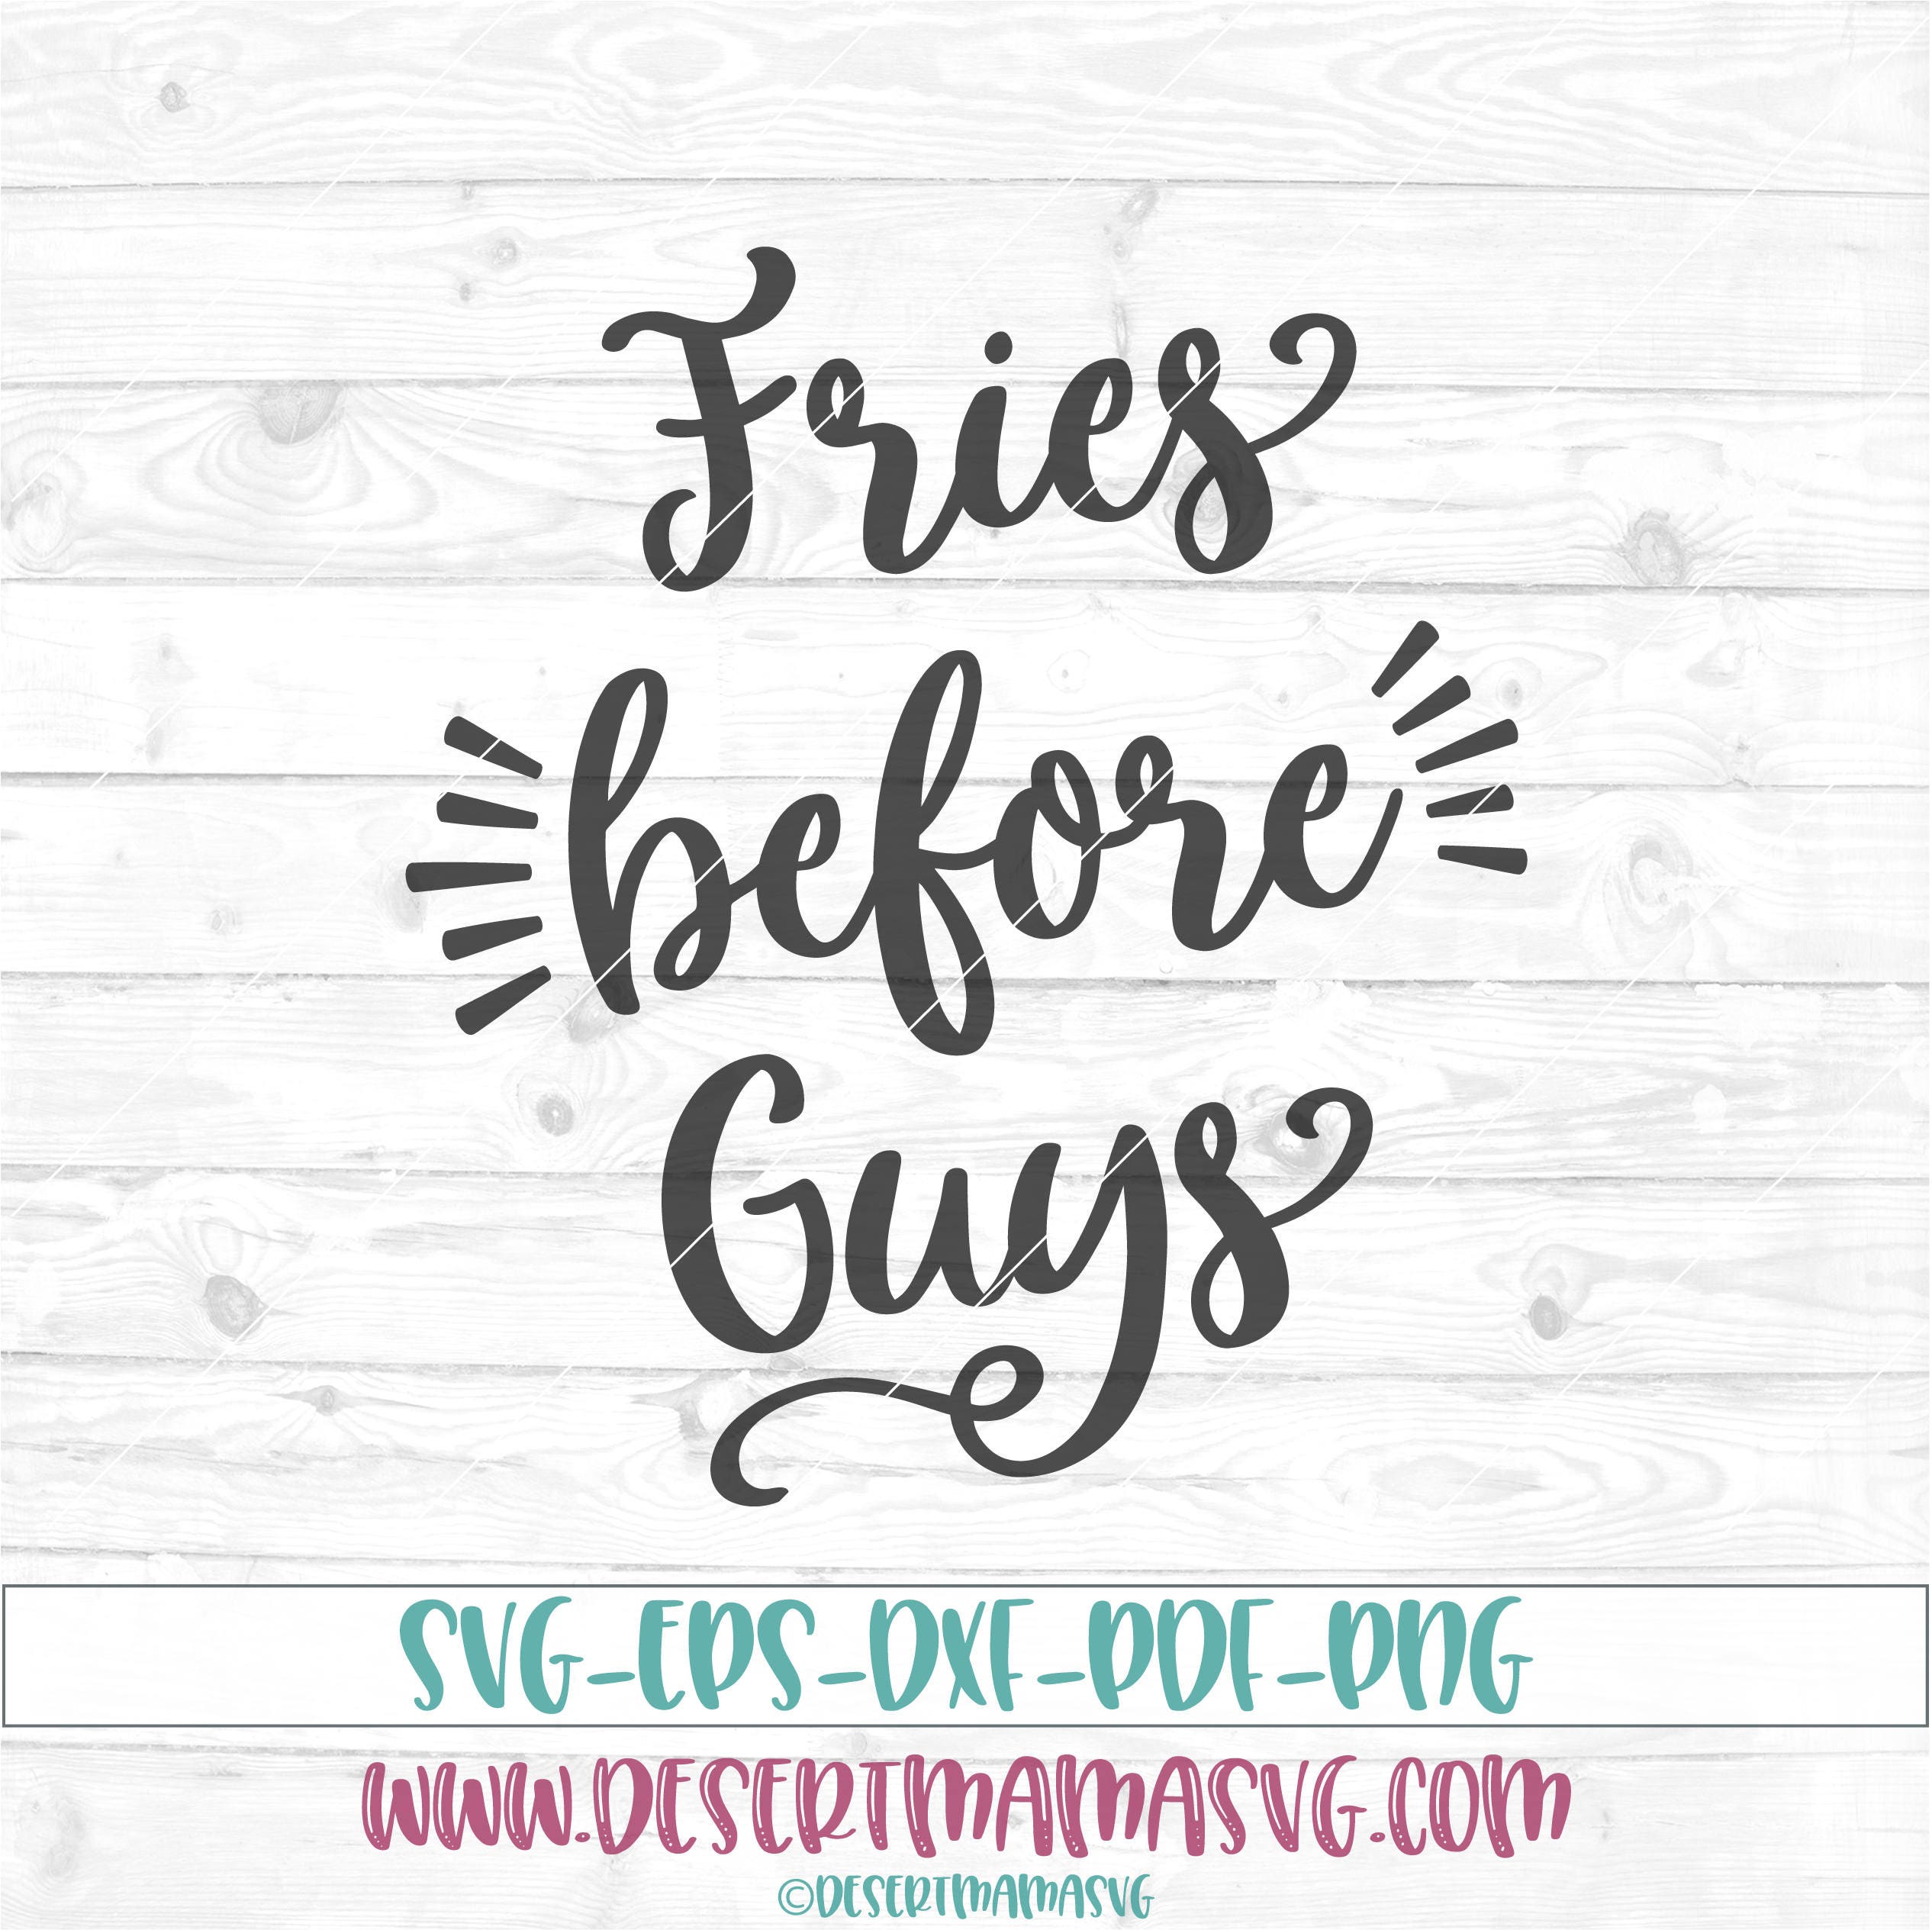 Download Fries Before Guys svg eps png cricut cameo scan N cut